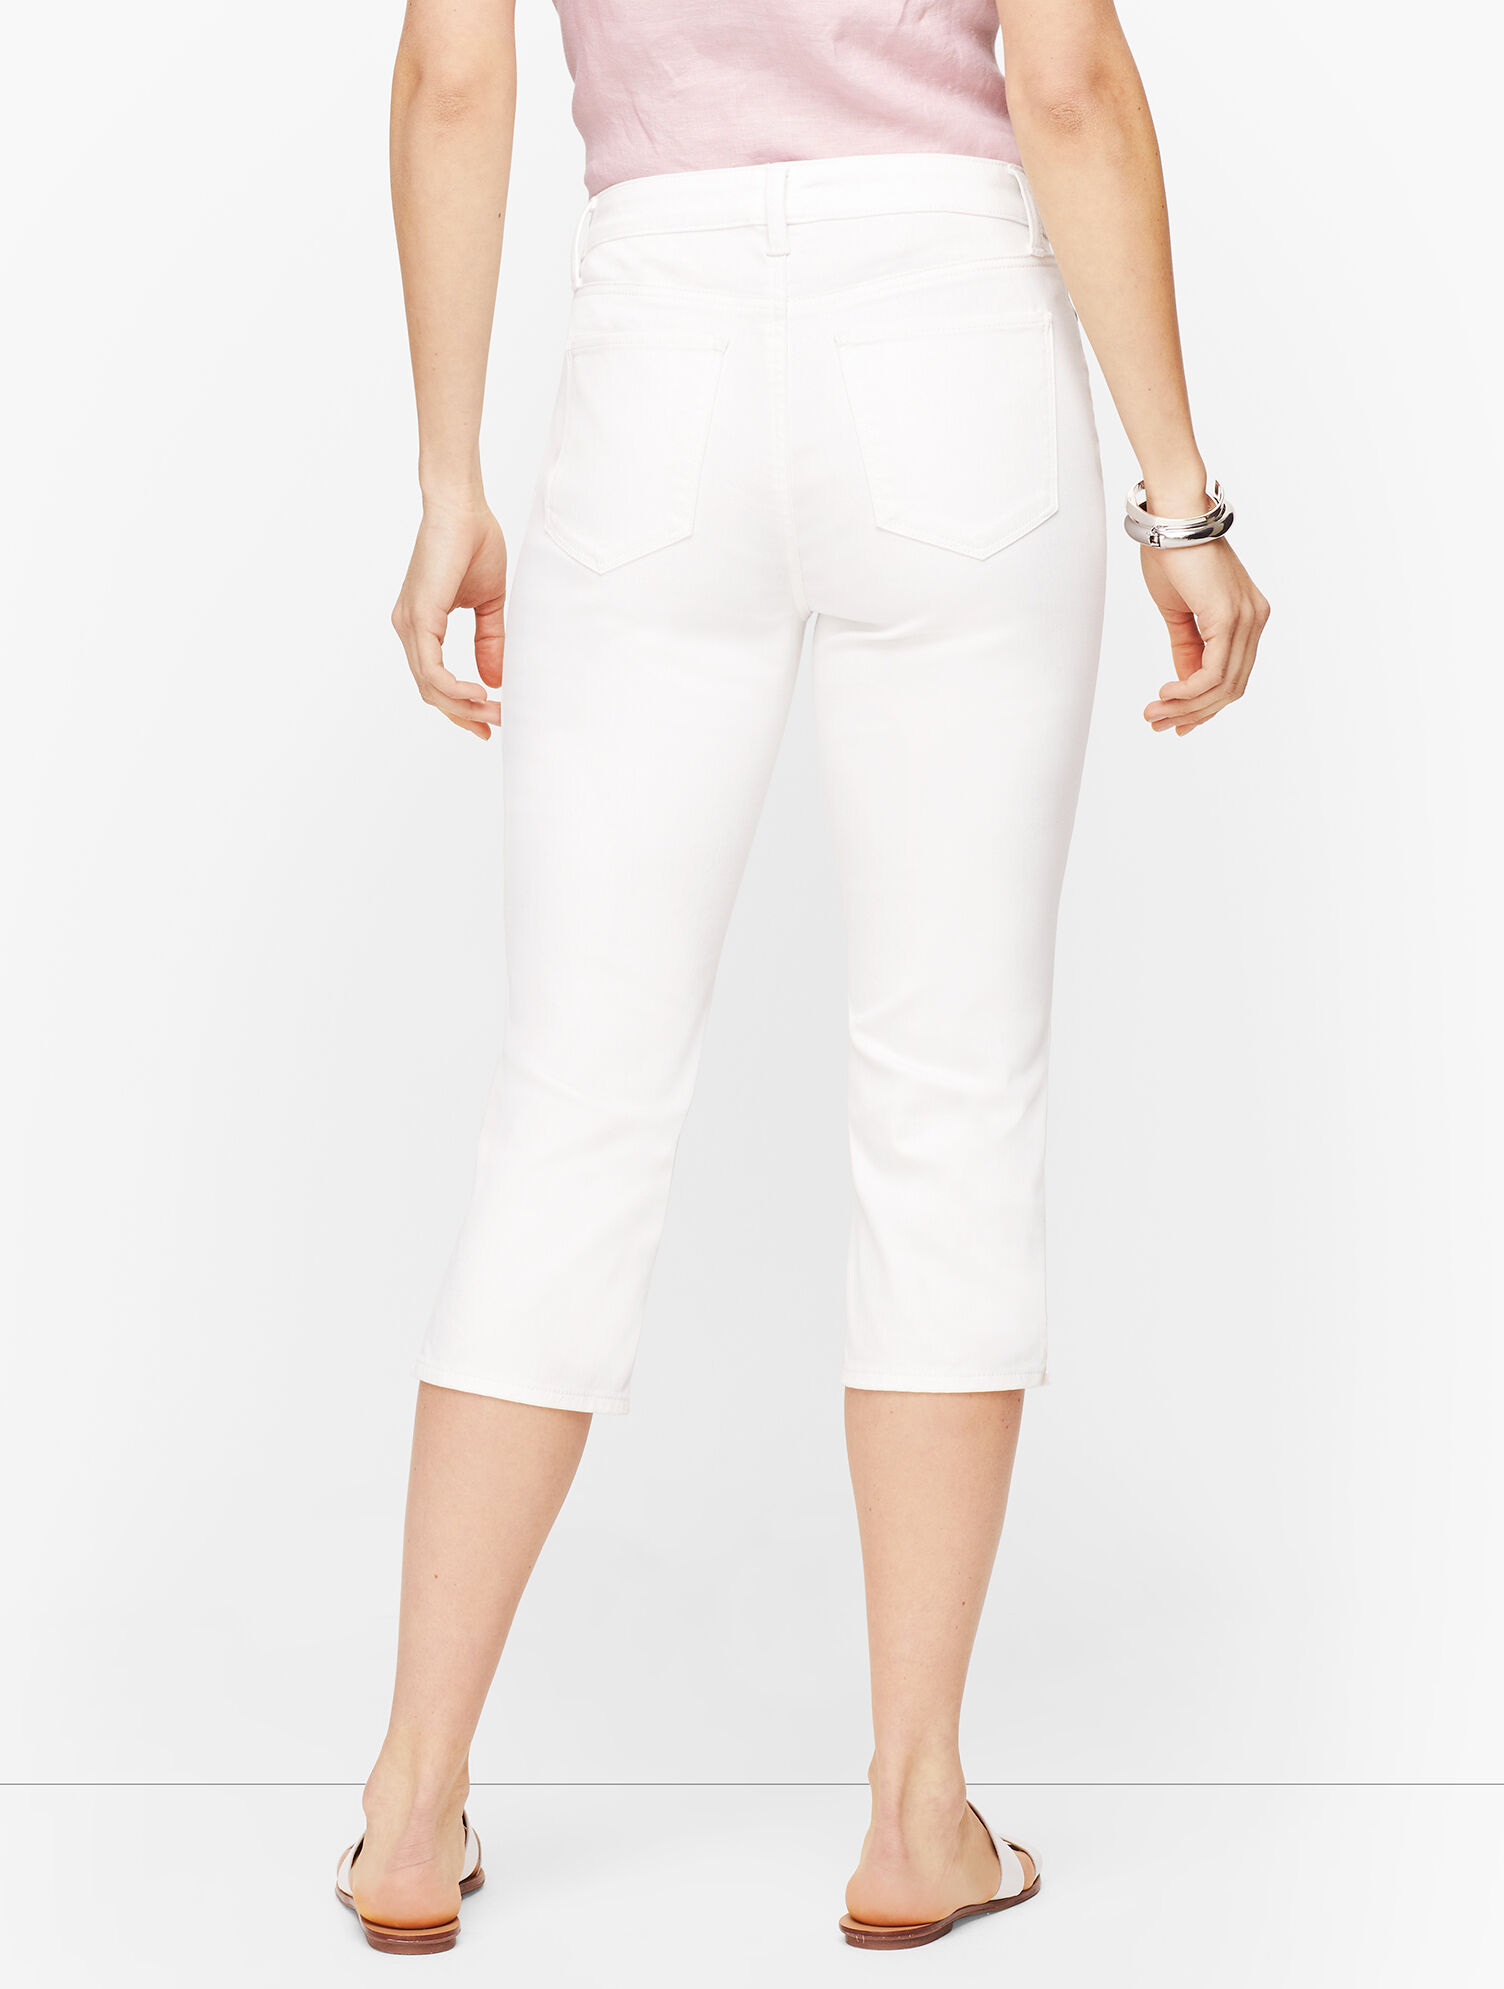 Pedal Pusher Jeans - Curvy Fit | Talbots